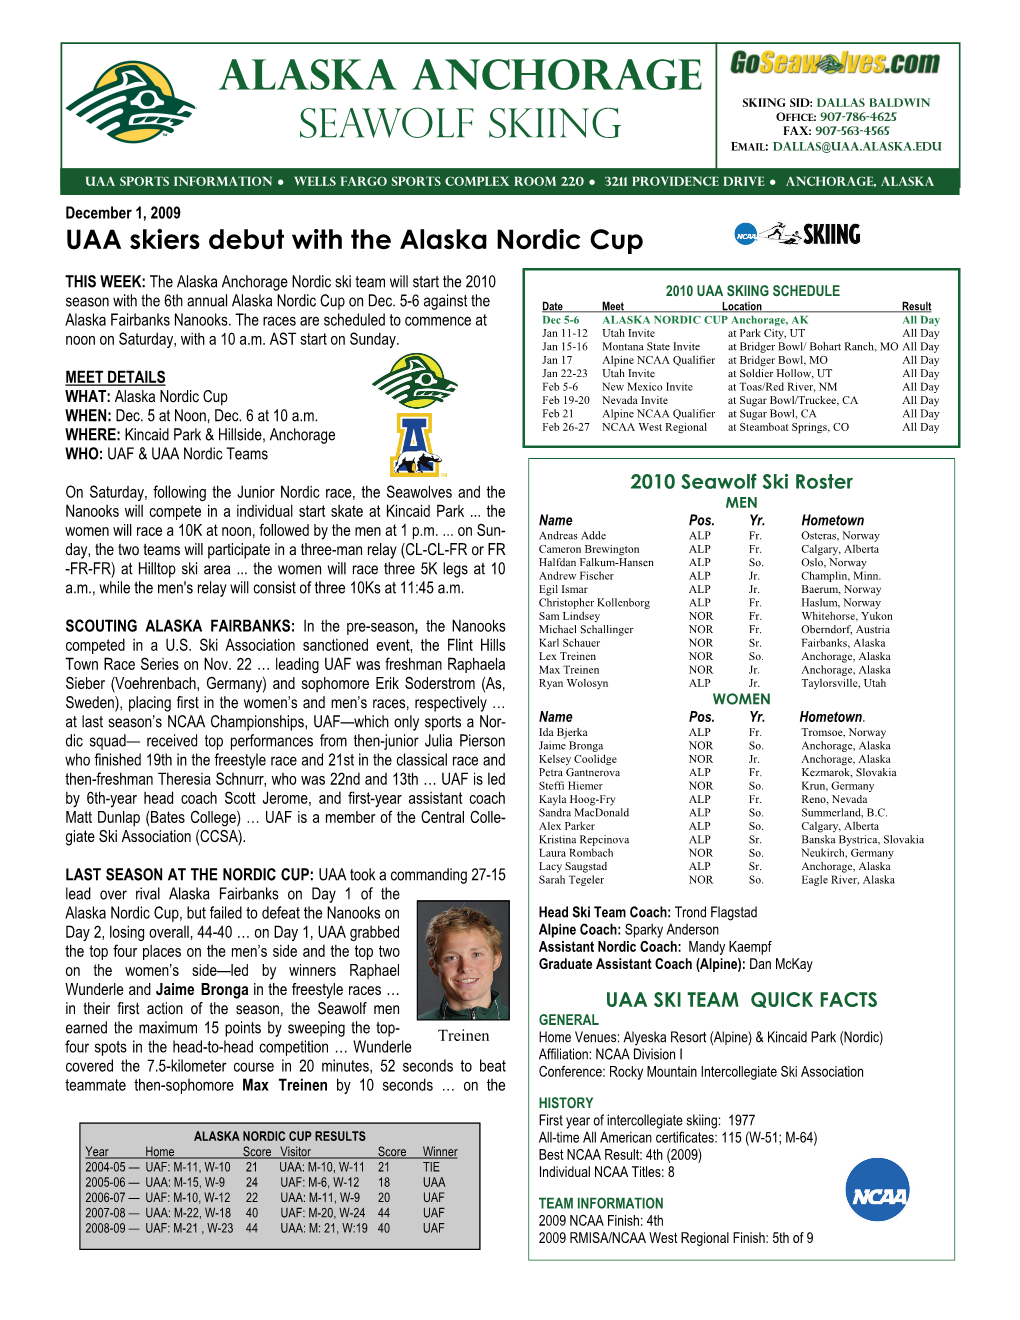 UAA Skiers Debut with the Alaska Nordic Cup